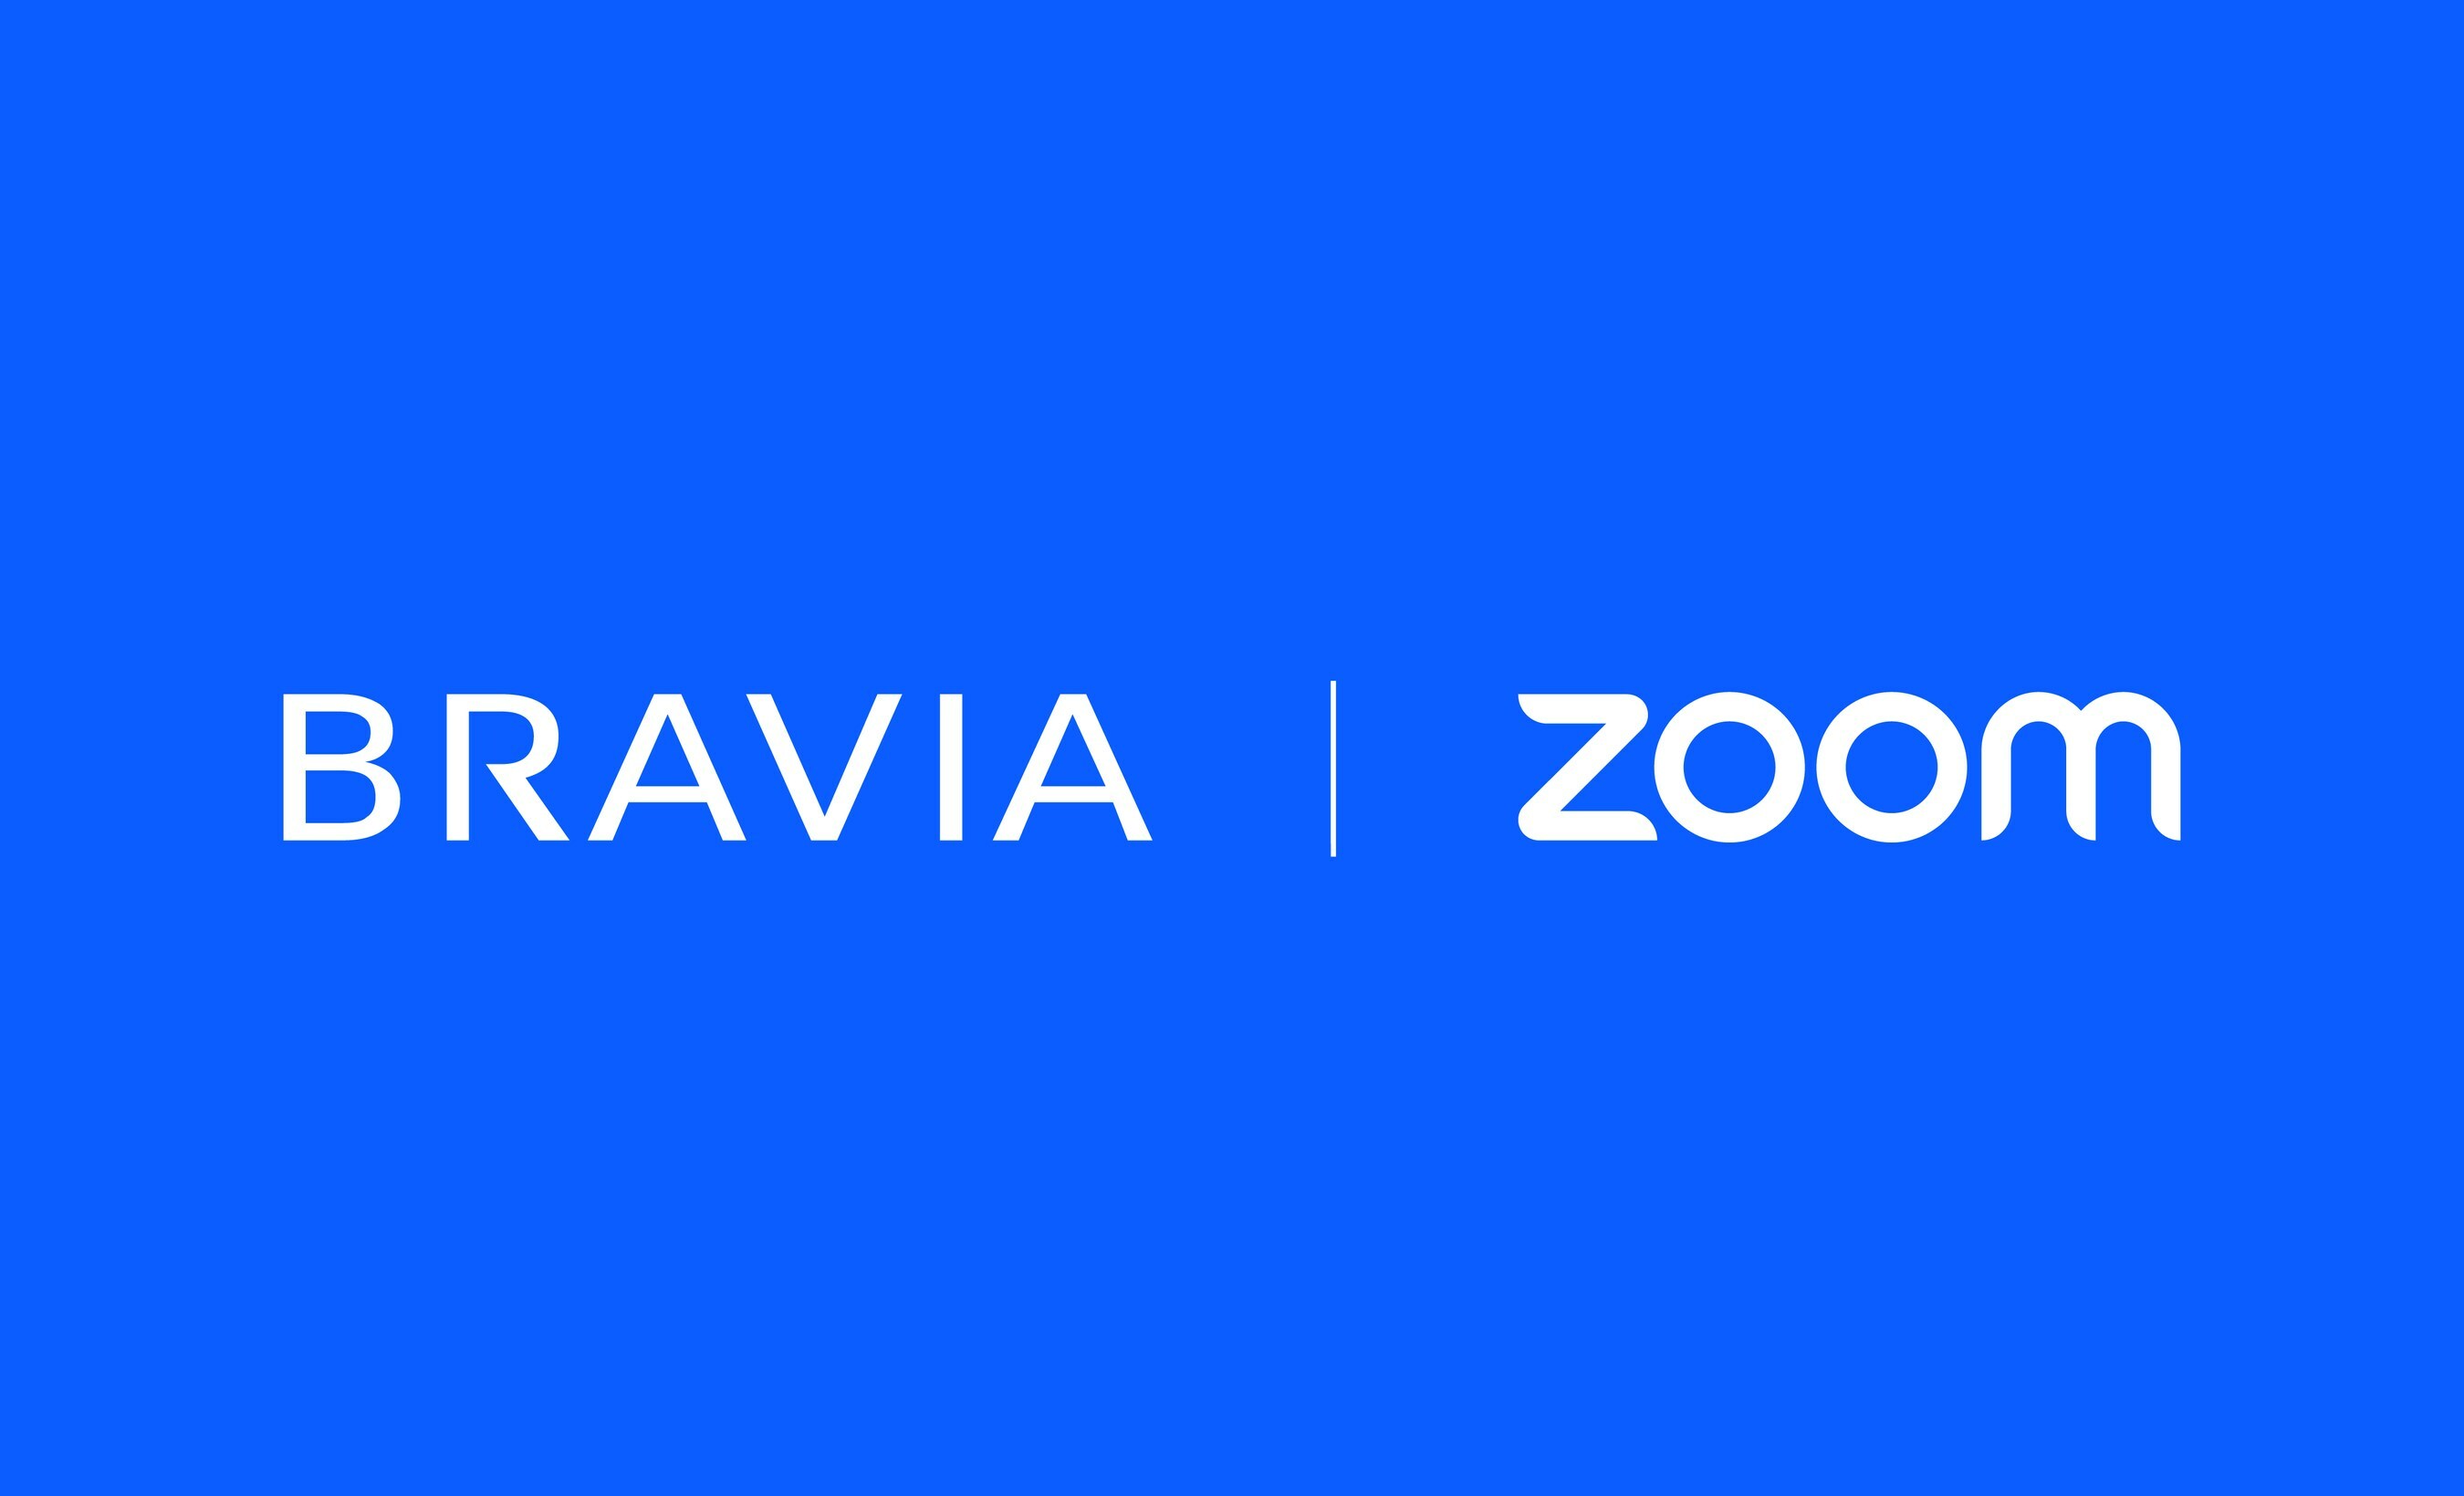 Sony Electronics and Zoom Video Communications Partner to Bring Video Conferencing to BRAVIA TVs